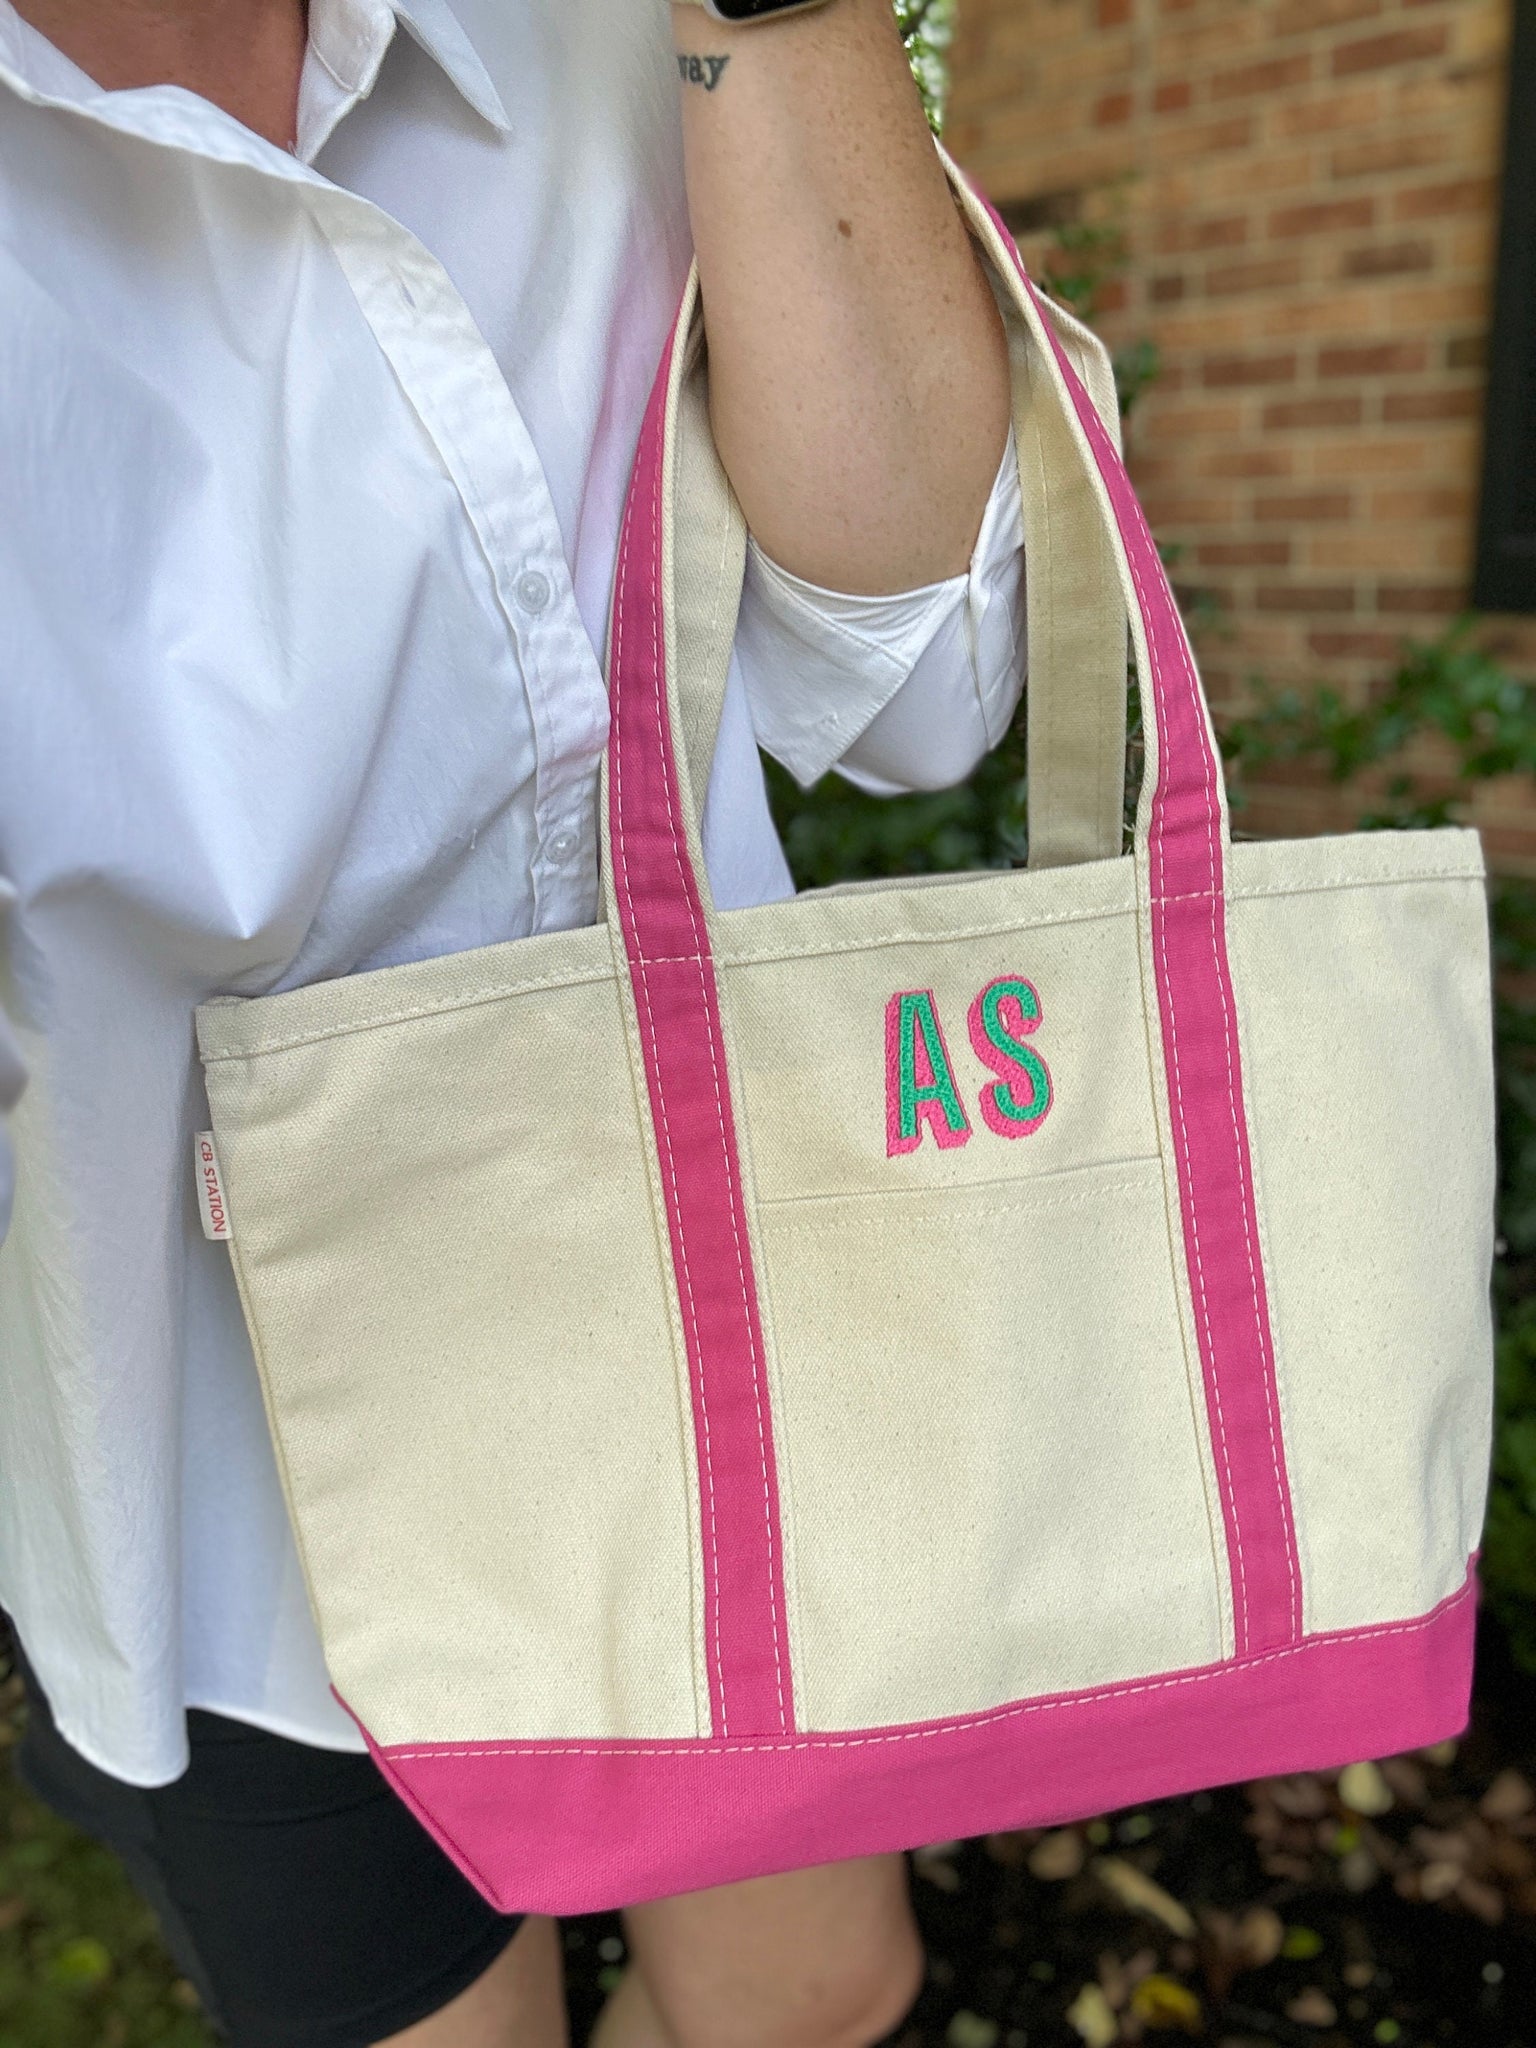 Monogram Boat Bag, Ironic Boat Canvas Bag, Personalized Tote Bag, Custom Tote Bag, Preppy Tote Bag, Embroidered 90s Classic Tote Carryall